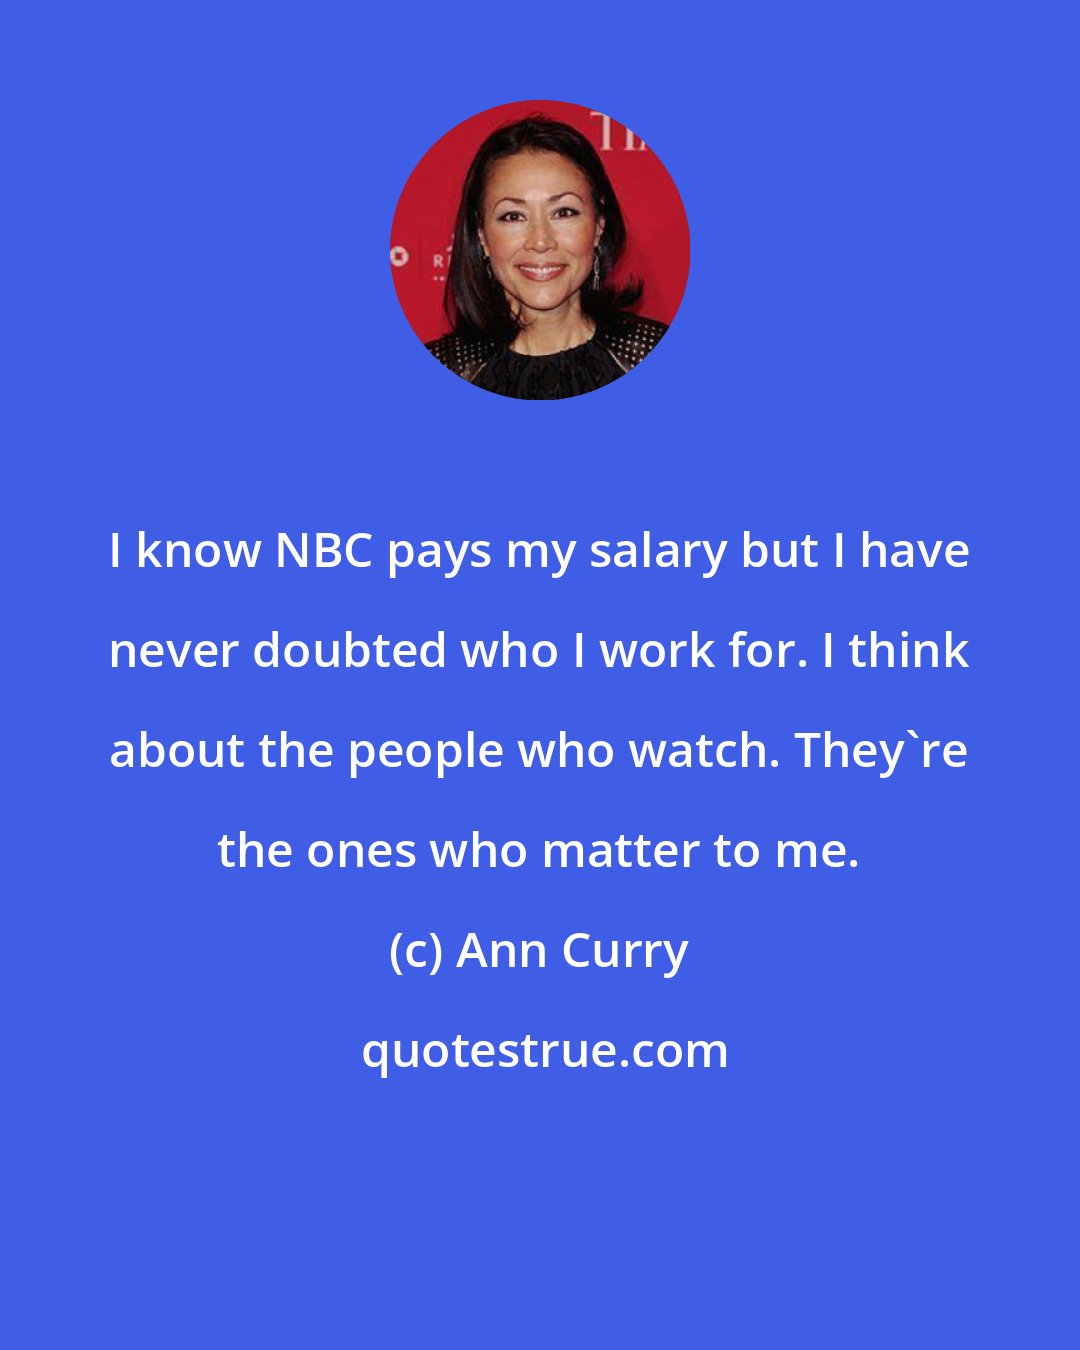 Ann Curry: I know NBC pays my salary but I have never doubted who I work for. I think about the people who watch. They're the ones who matter to me.